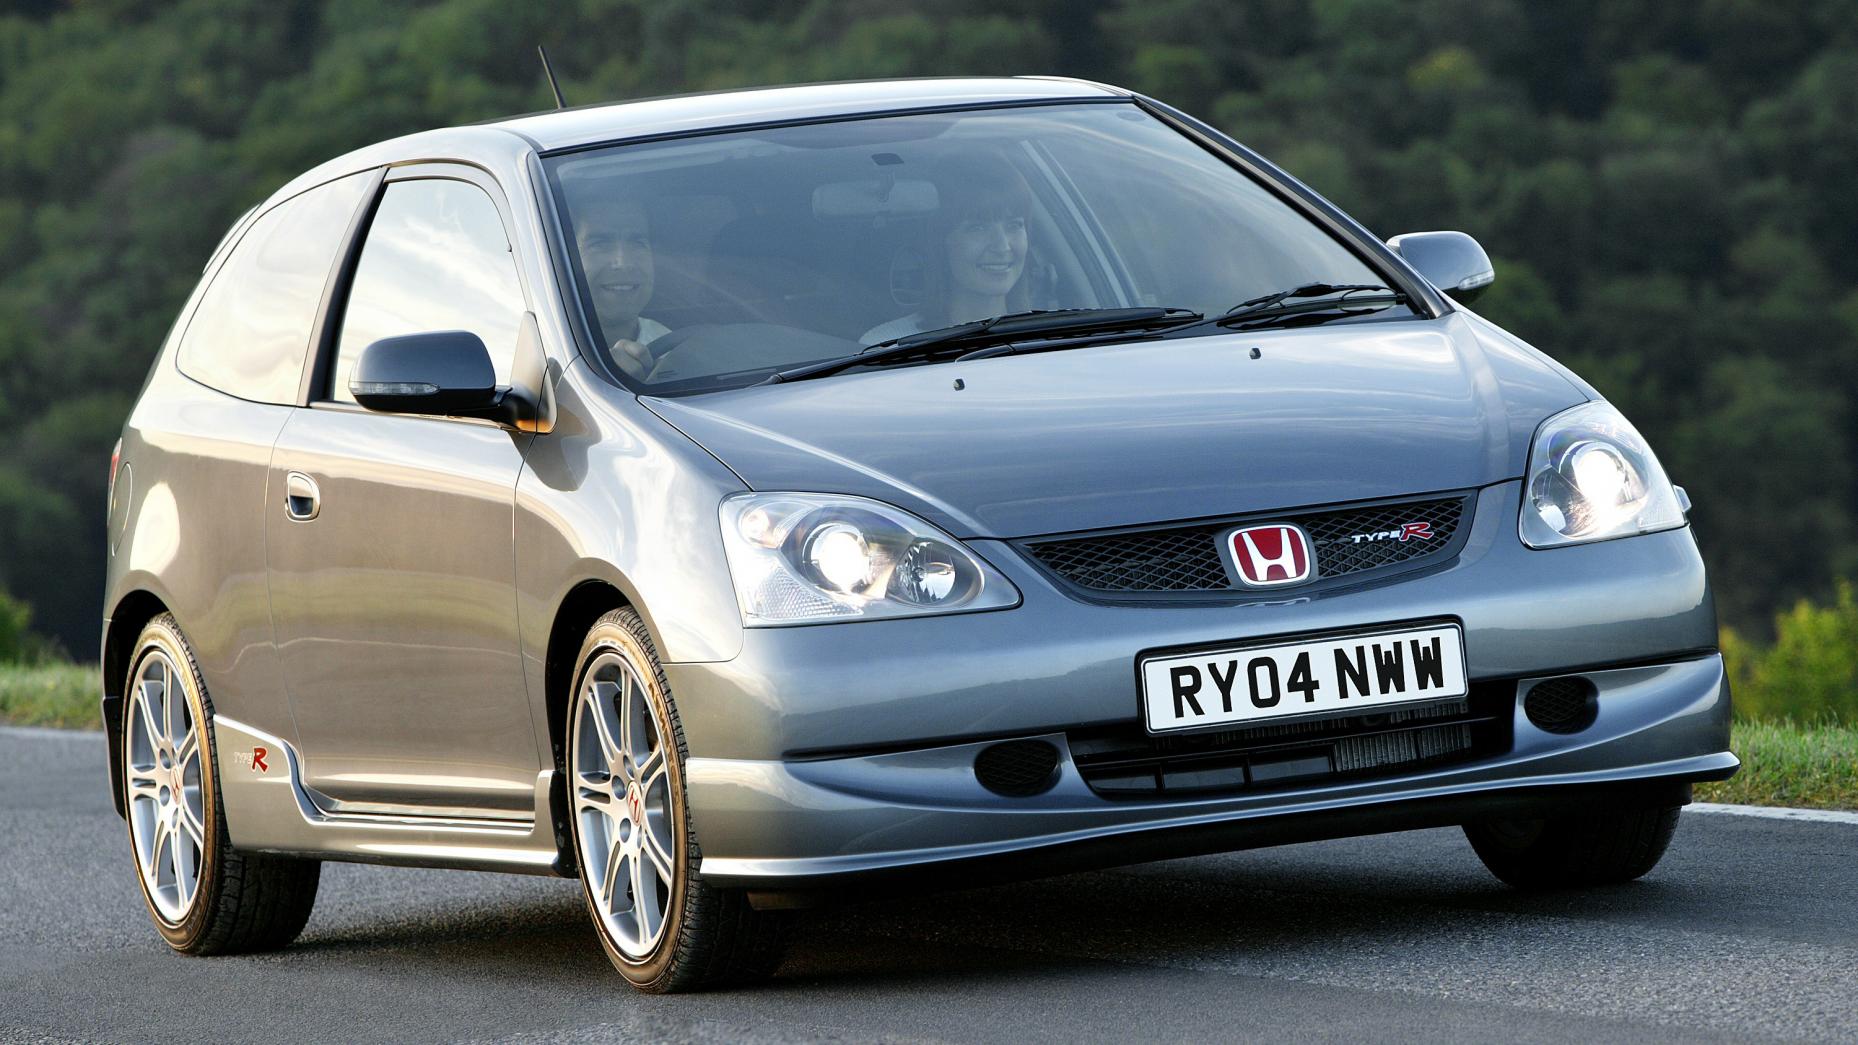 The 11 best hot hatches of all time